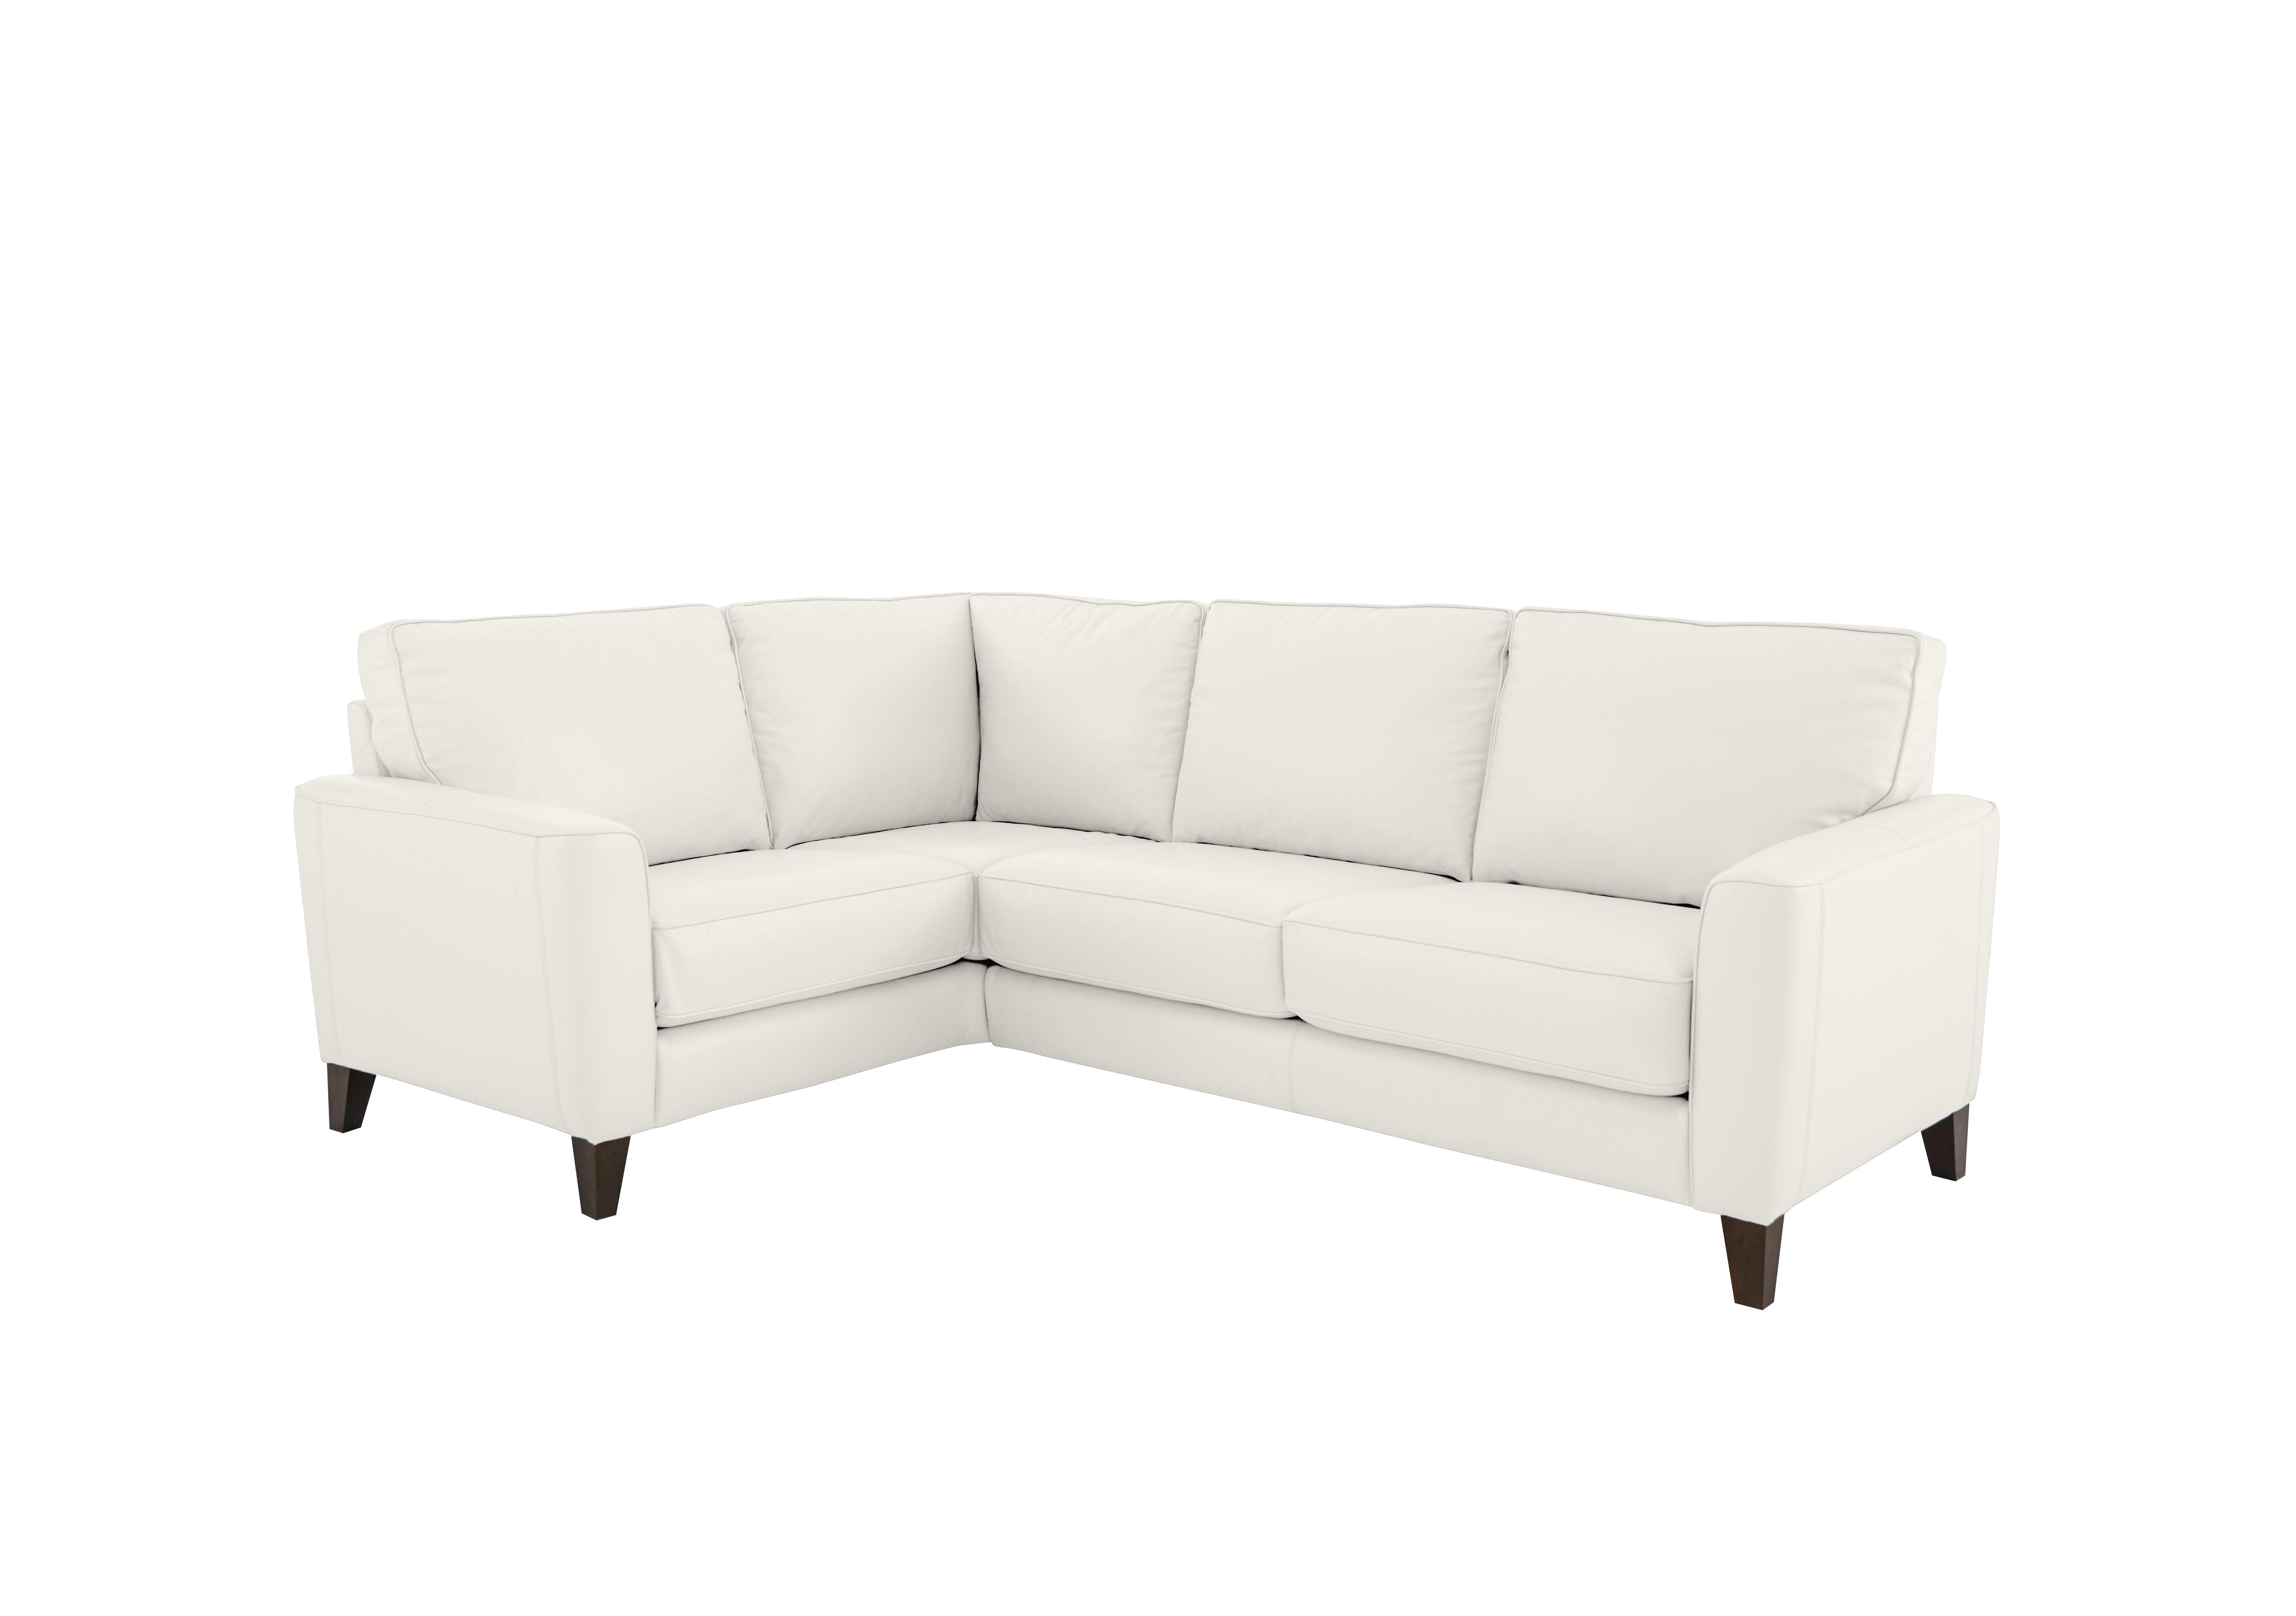 Brondby Small Leather Corner Sofa in Bv-744d Star White on Furniture Village